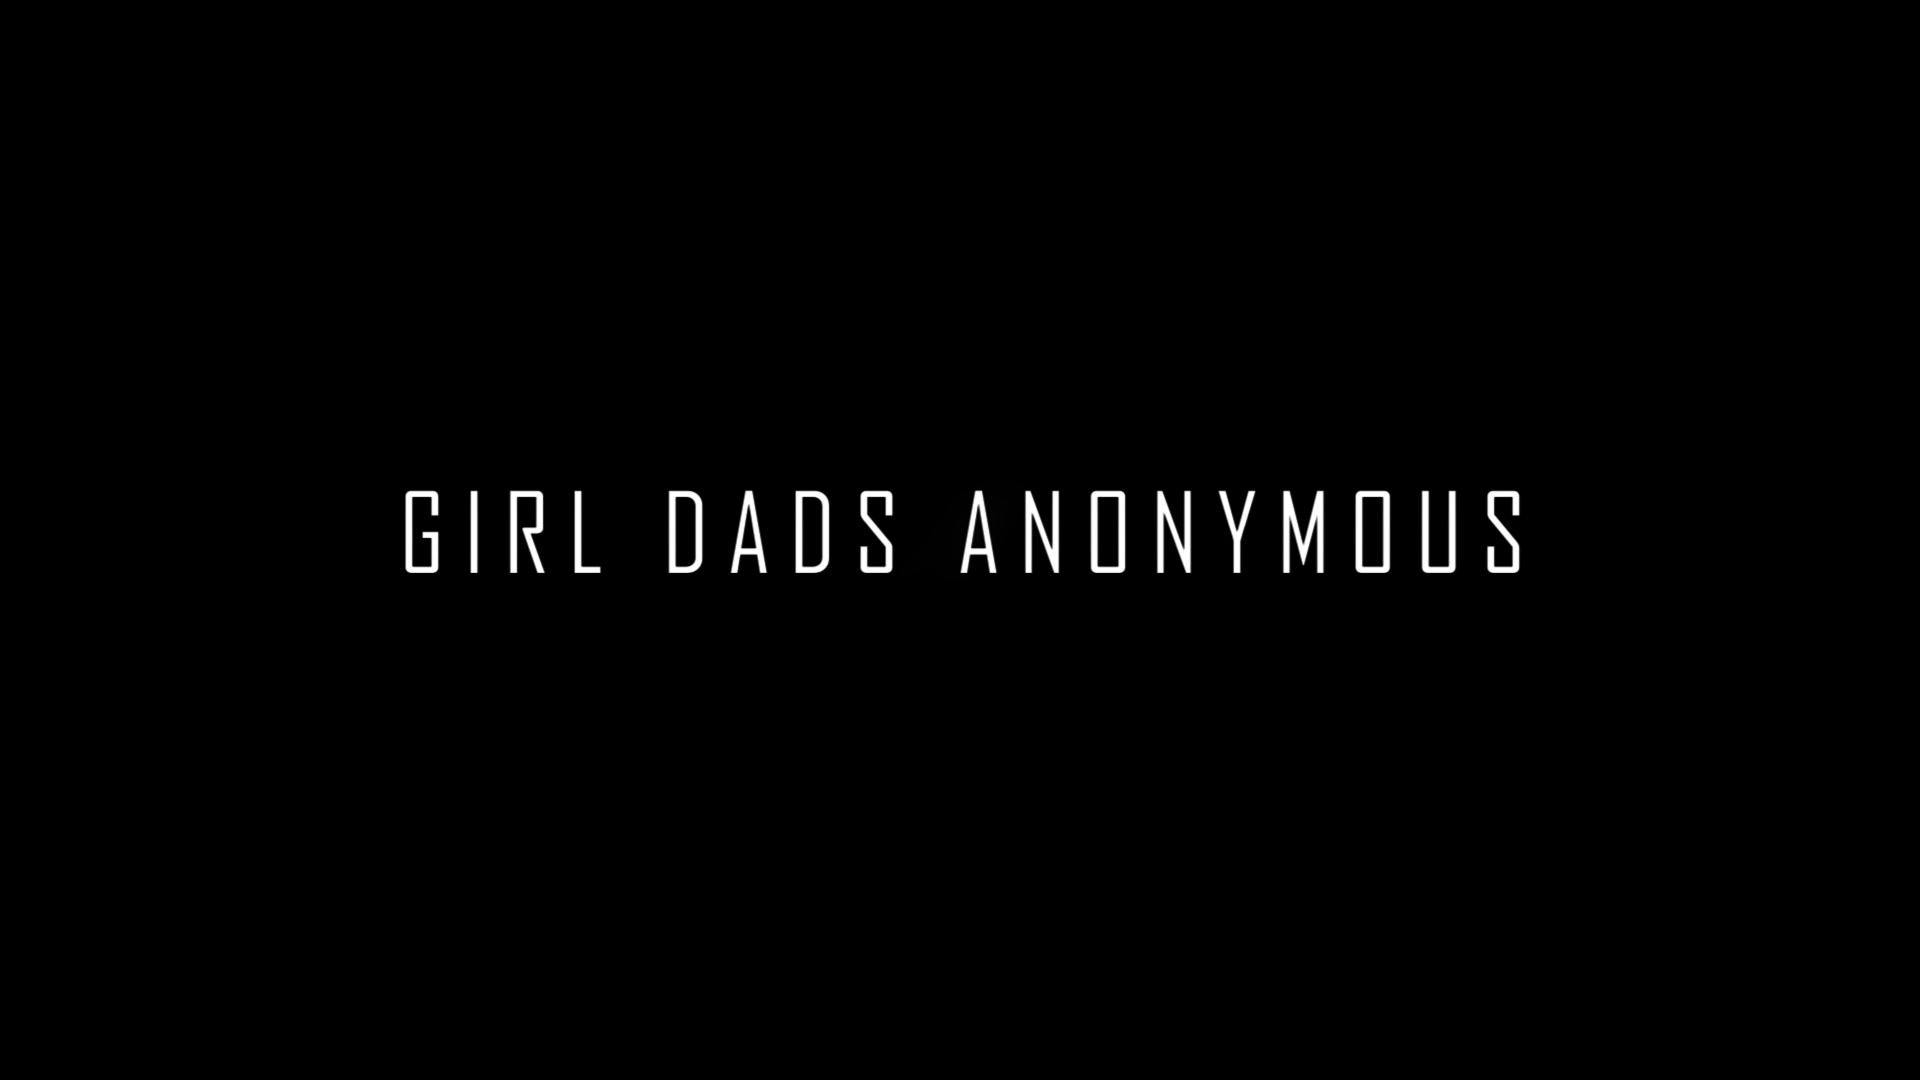 Girl Dads Anonymous Episode 3 - The Dance